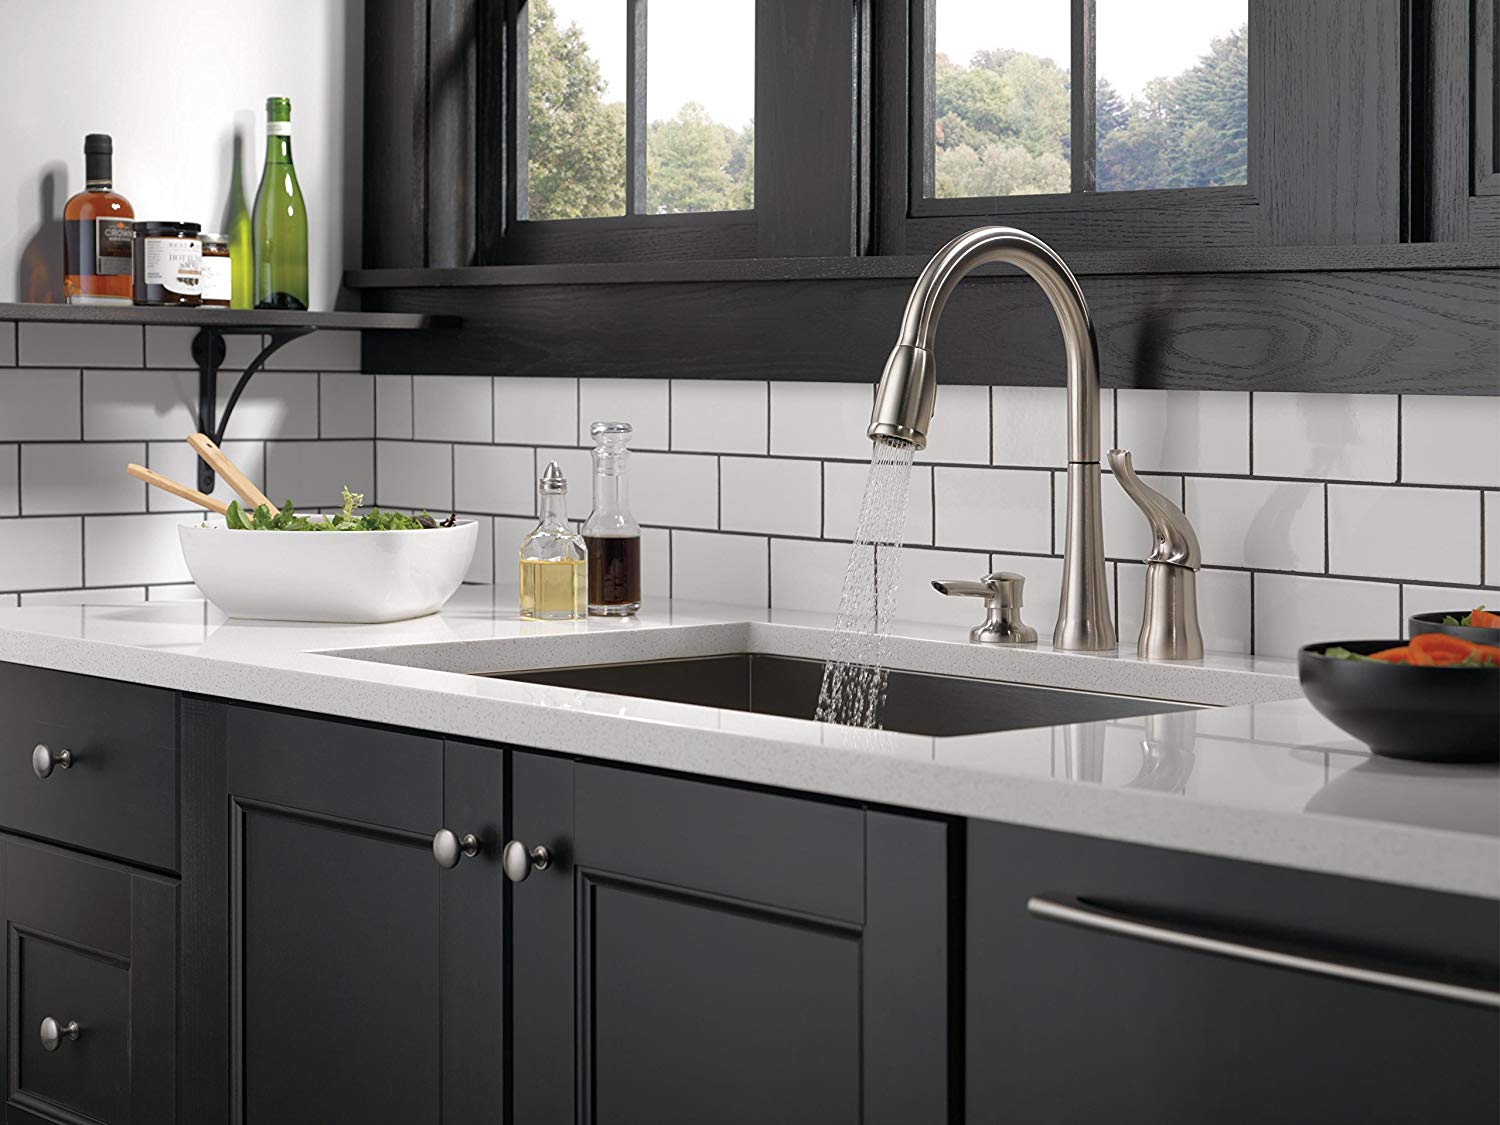 wholesale kitchen sink and faucet